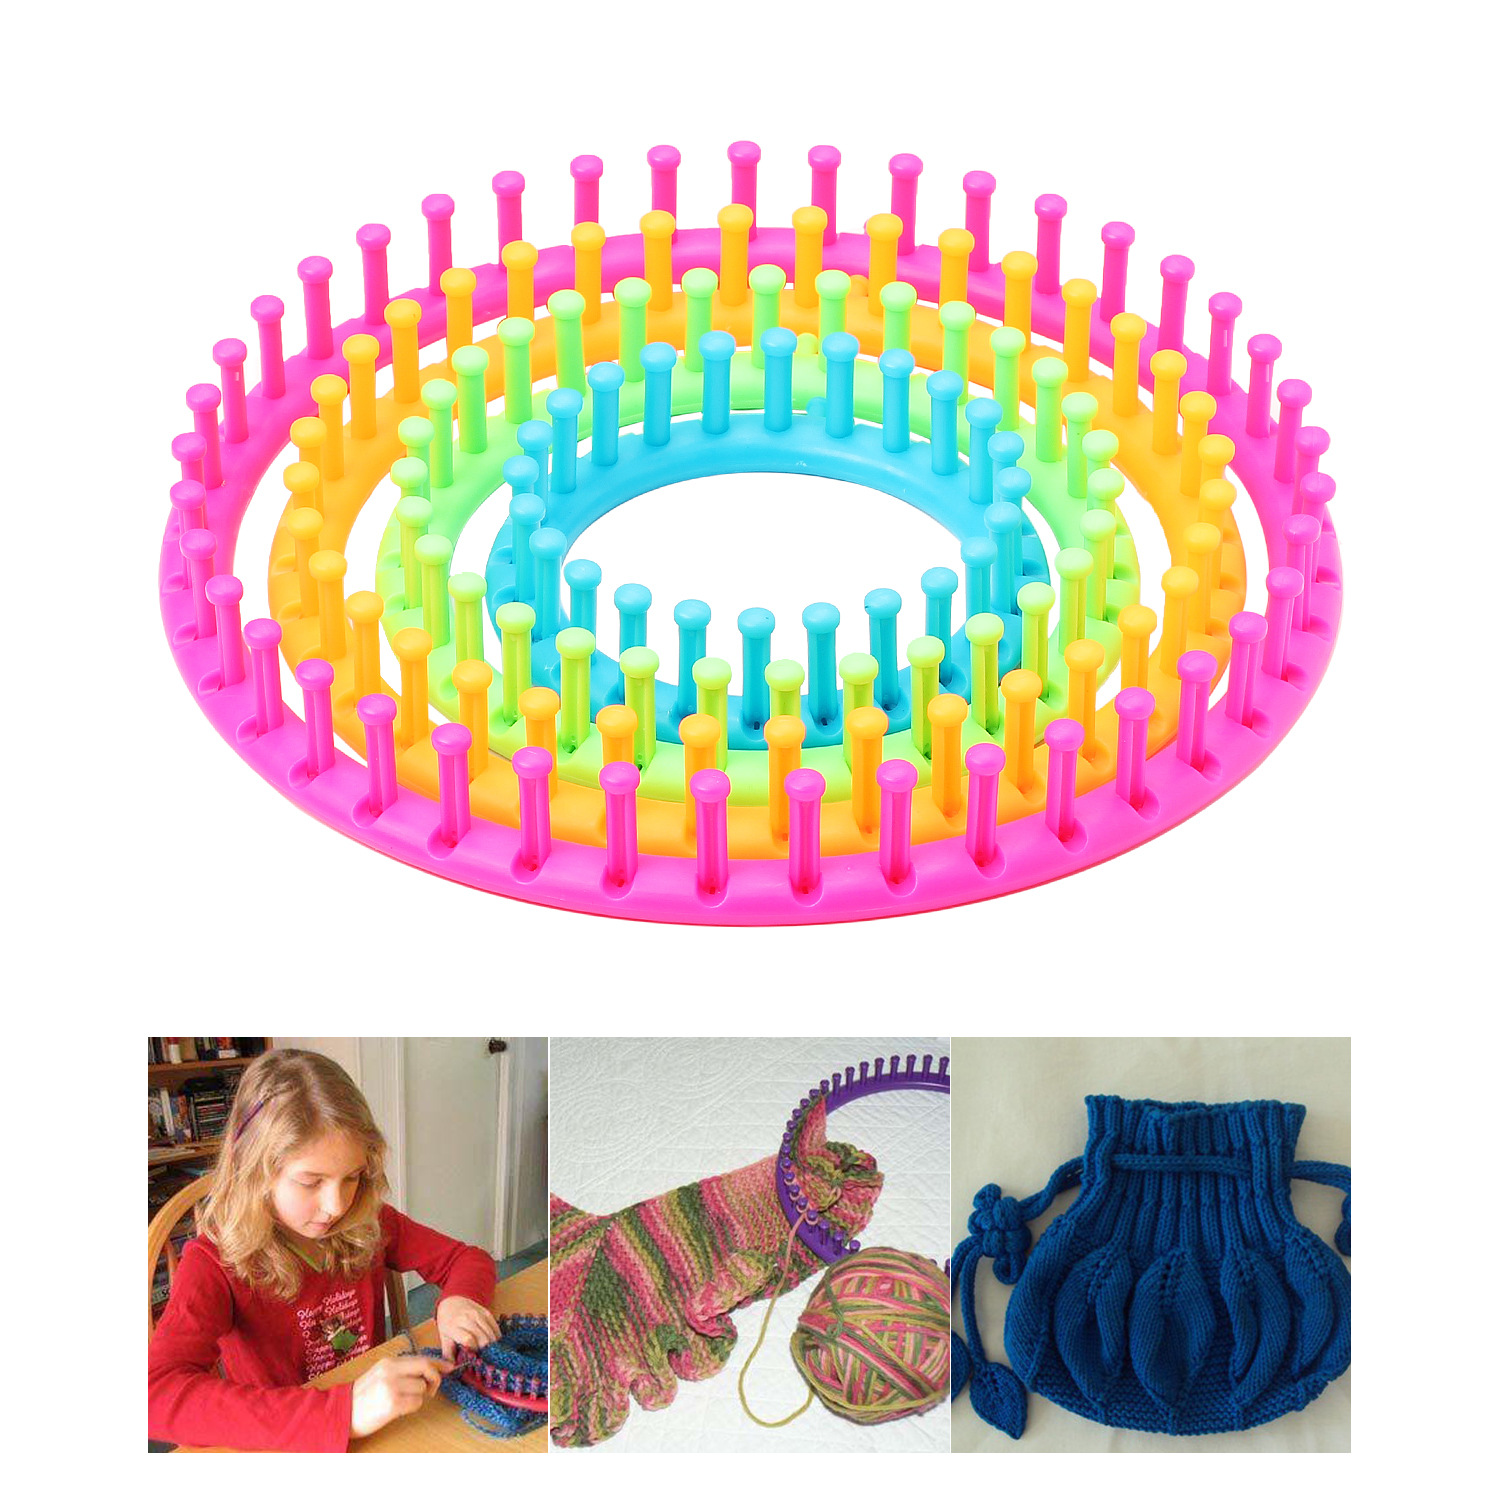 Mira Handcrafts Complete Round Knitting Loom Kit | 4 Knitting Circle Looms, 4 Pompom Makers, 3 Plastic Needles, 1 Soft Grip Pick | Perfect Crochet